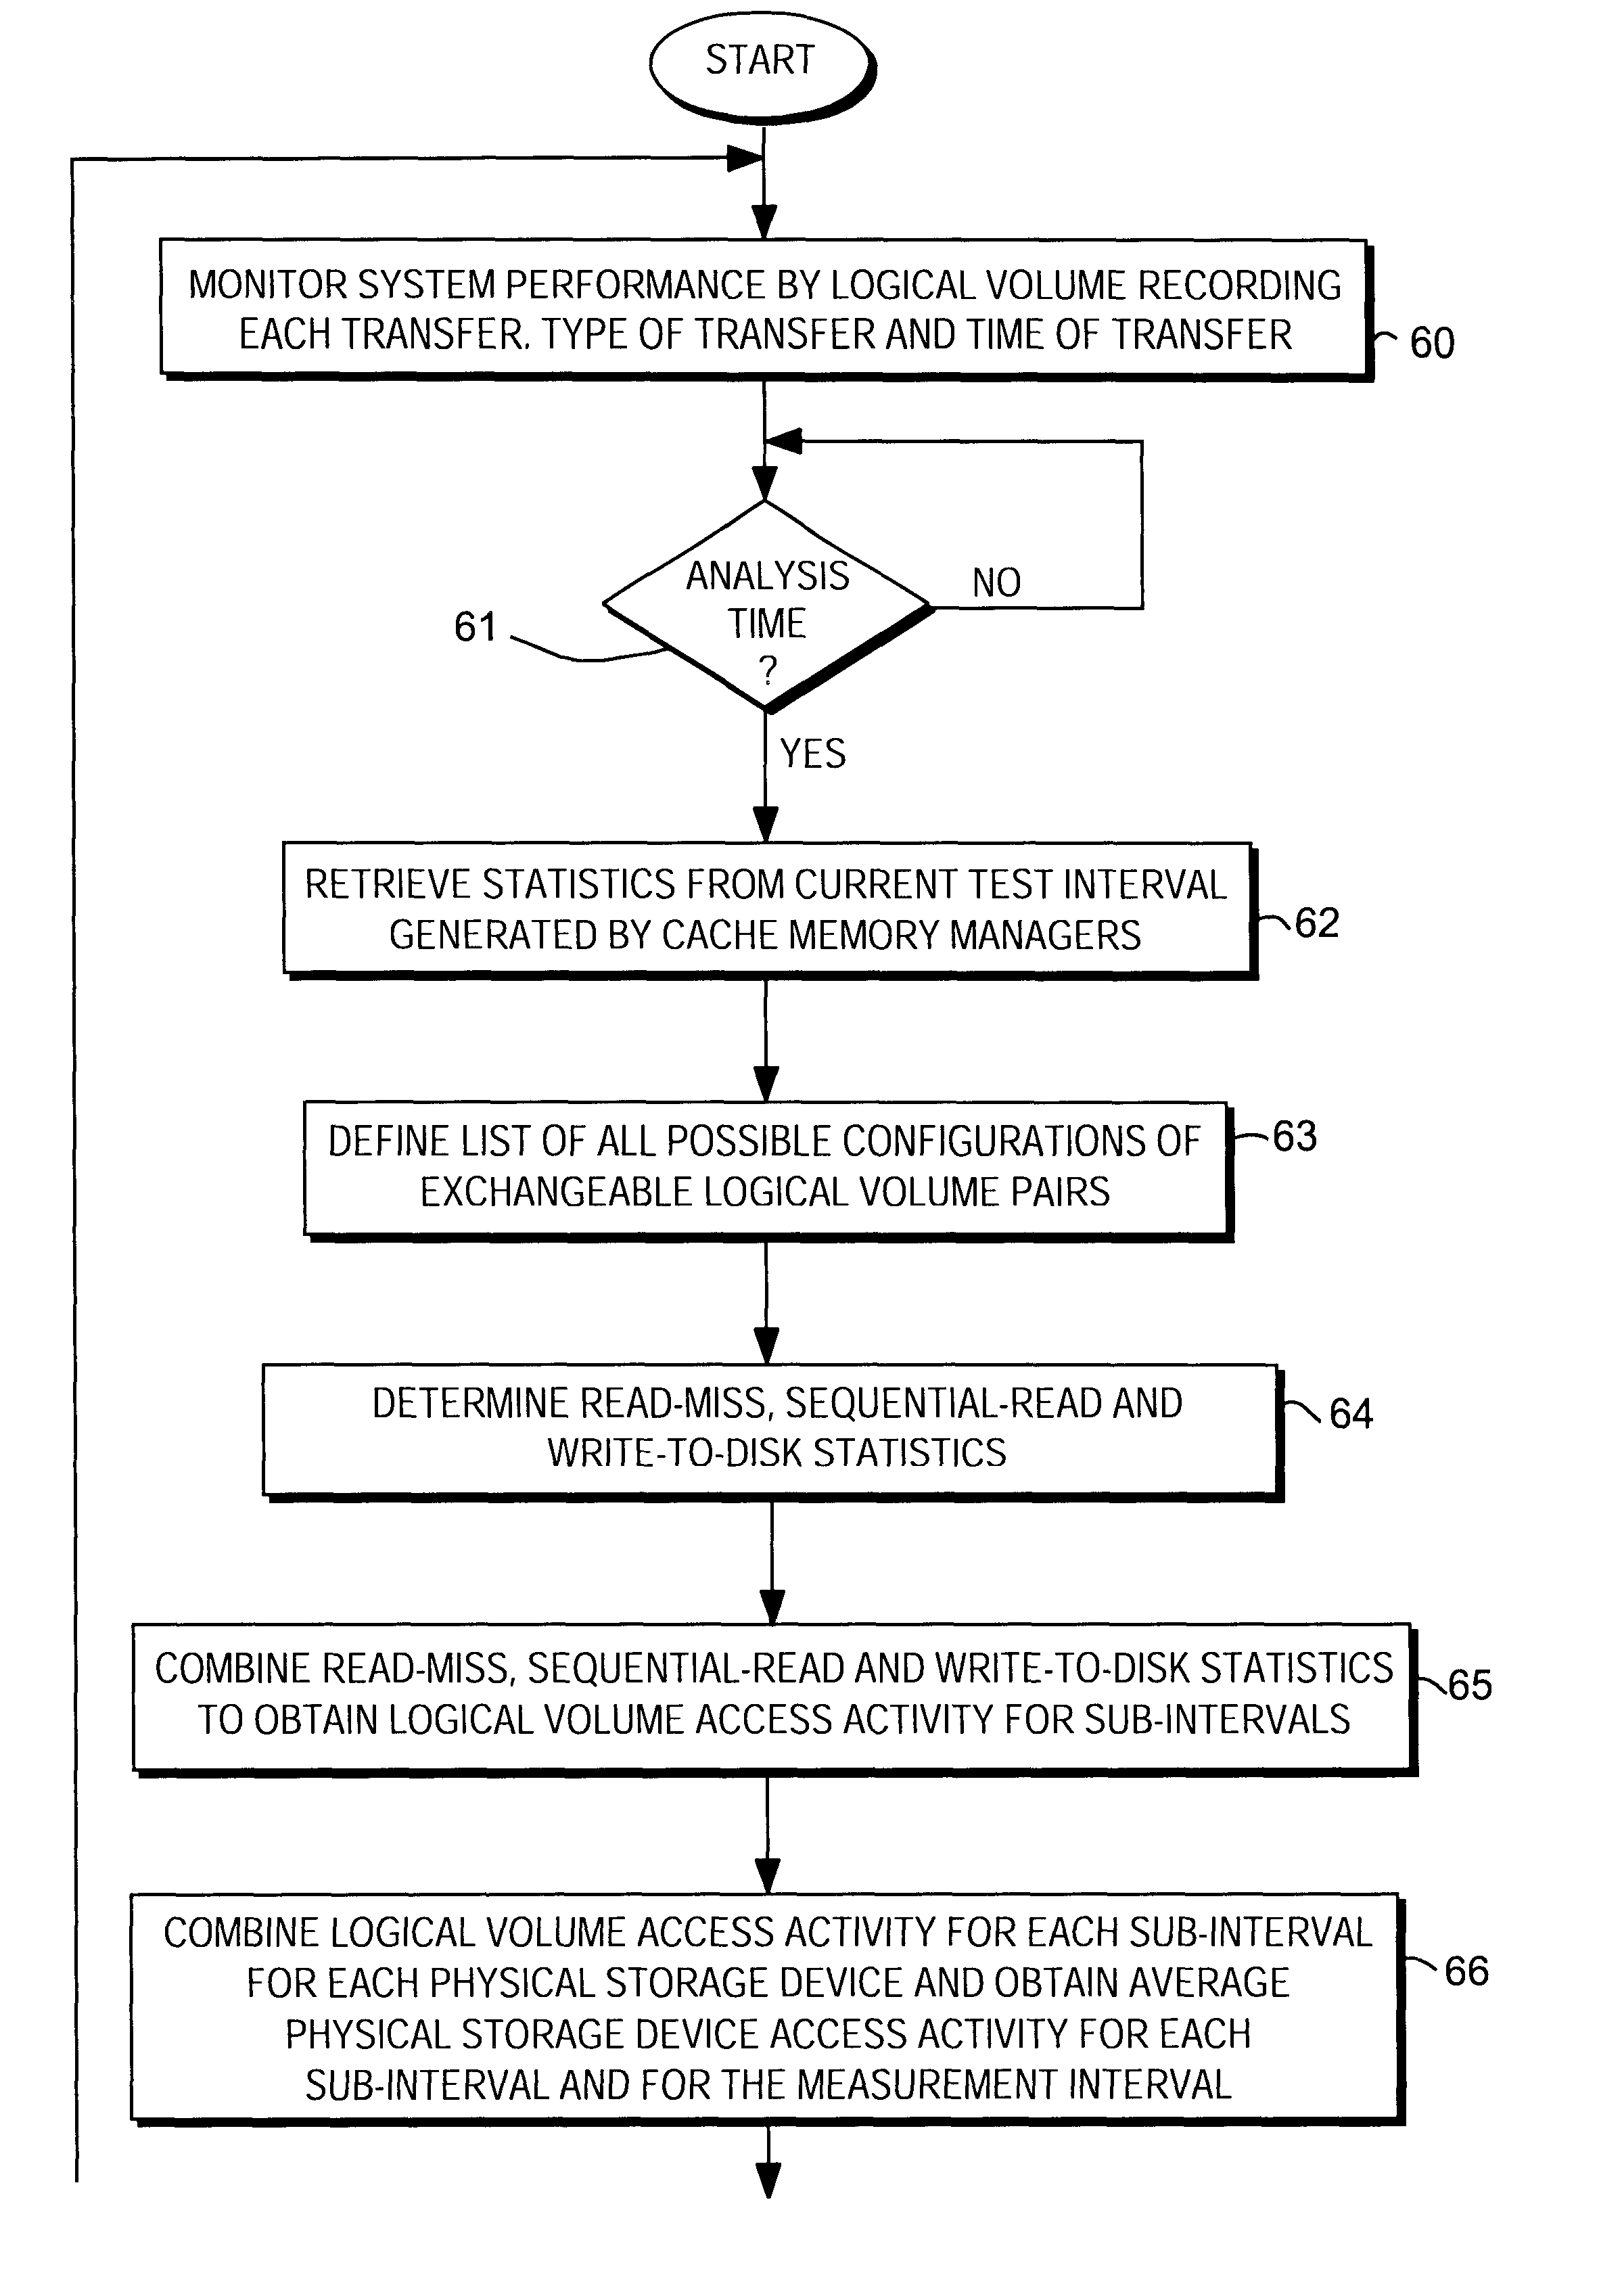 Load balancing on disk array storage device